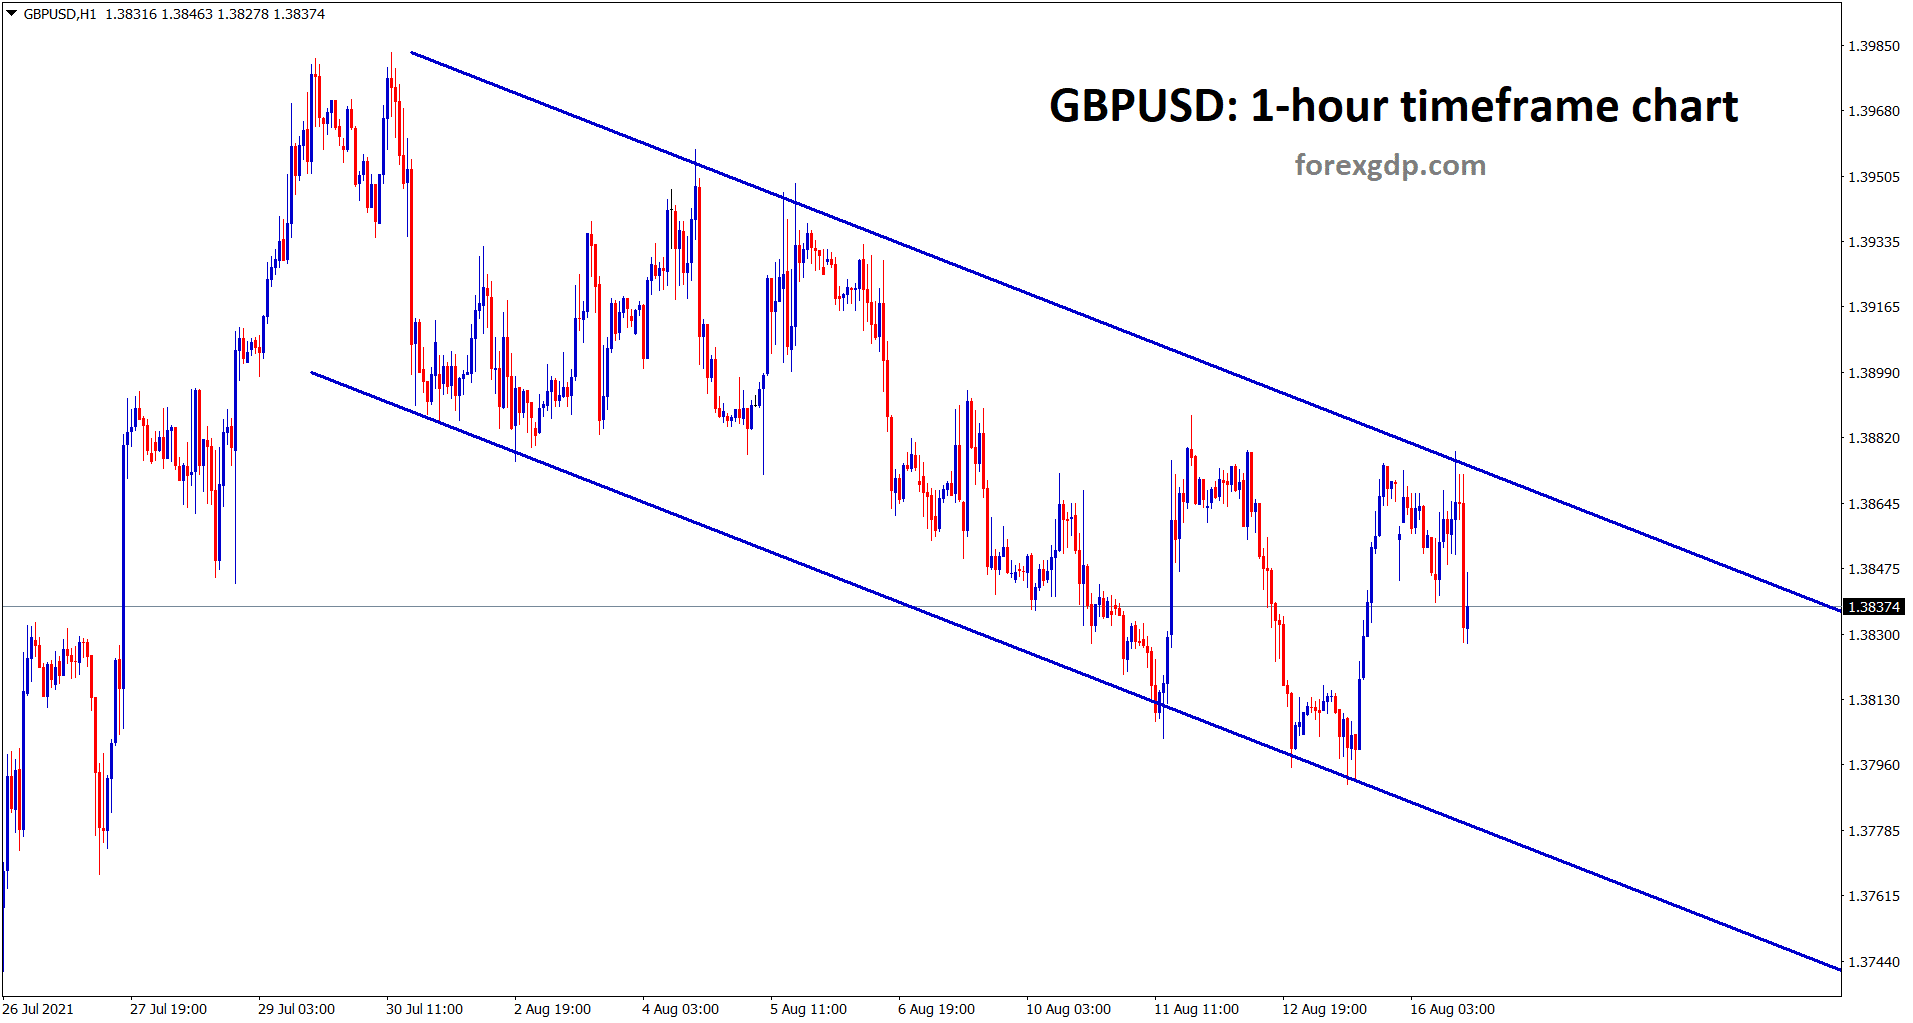 GBPUSD is moving in a descending channel range